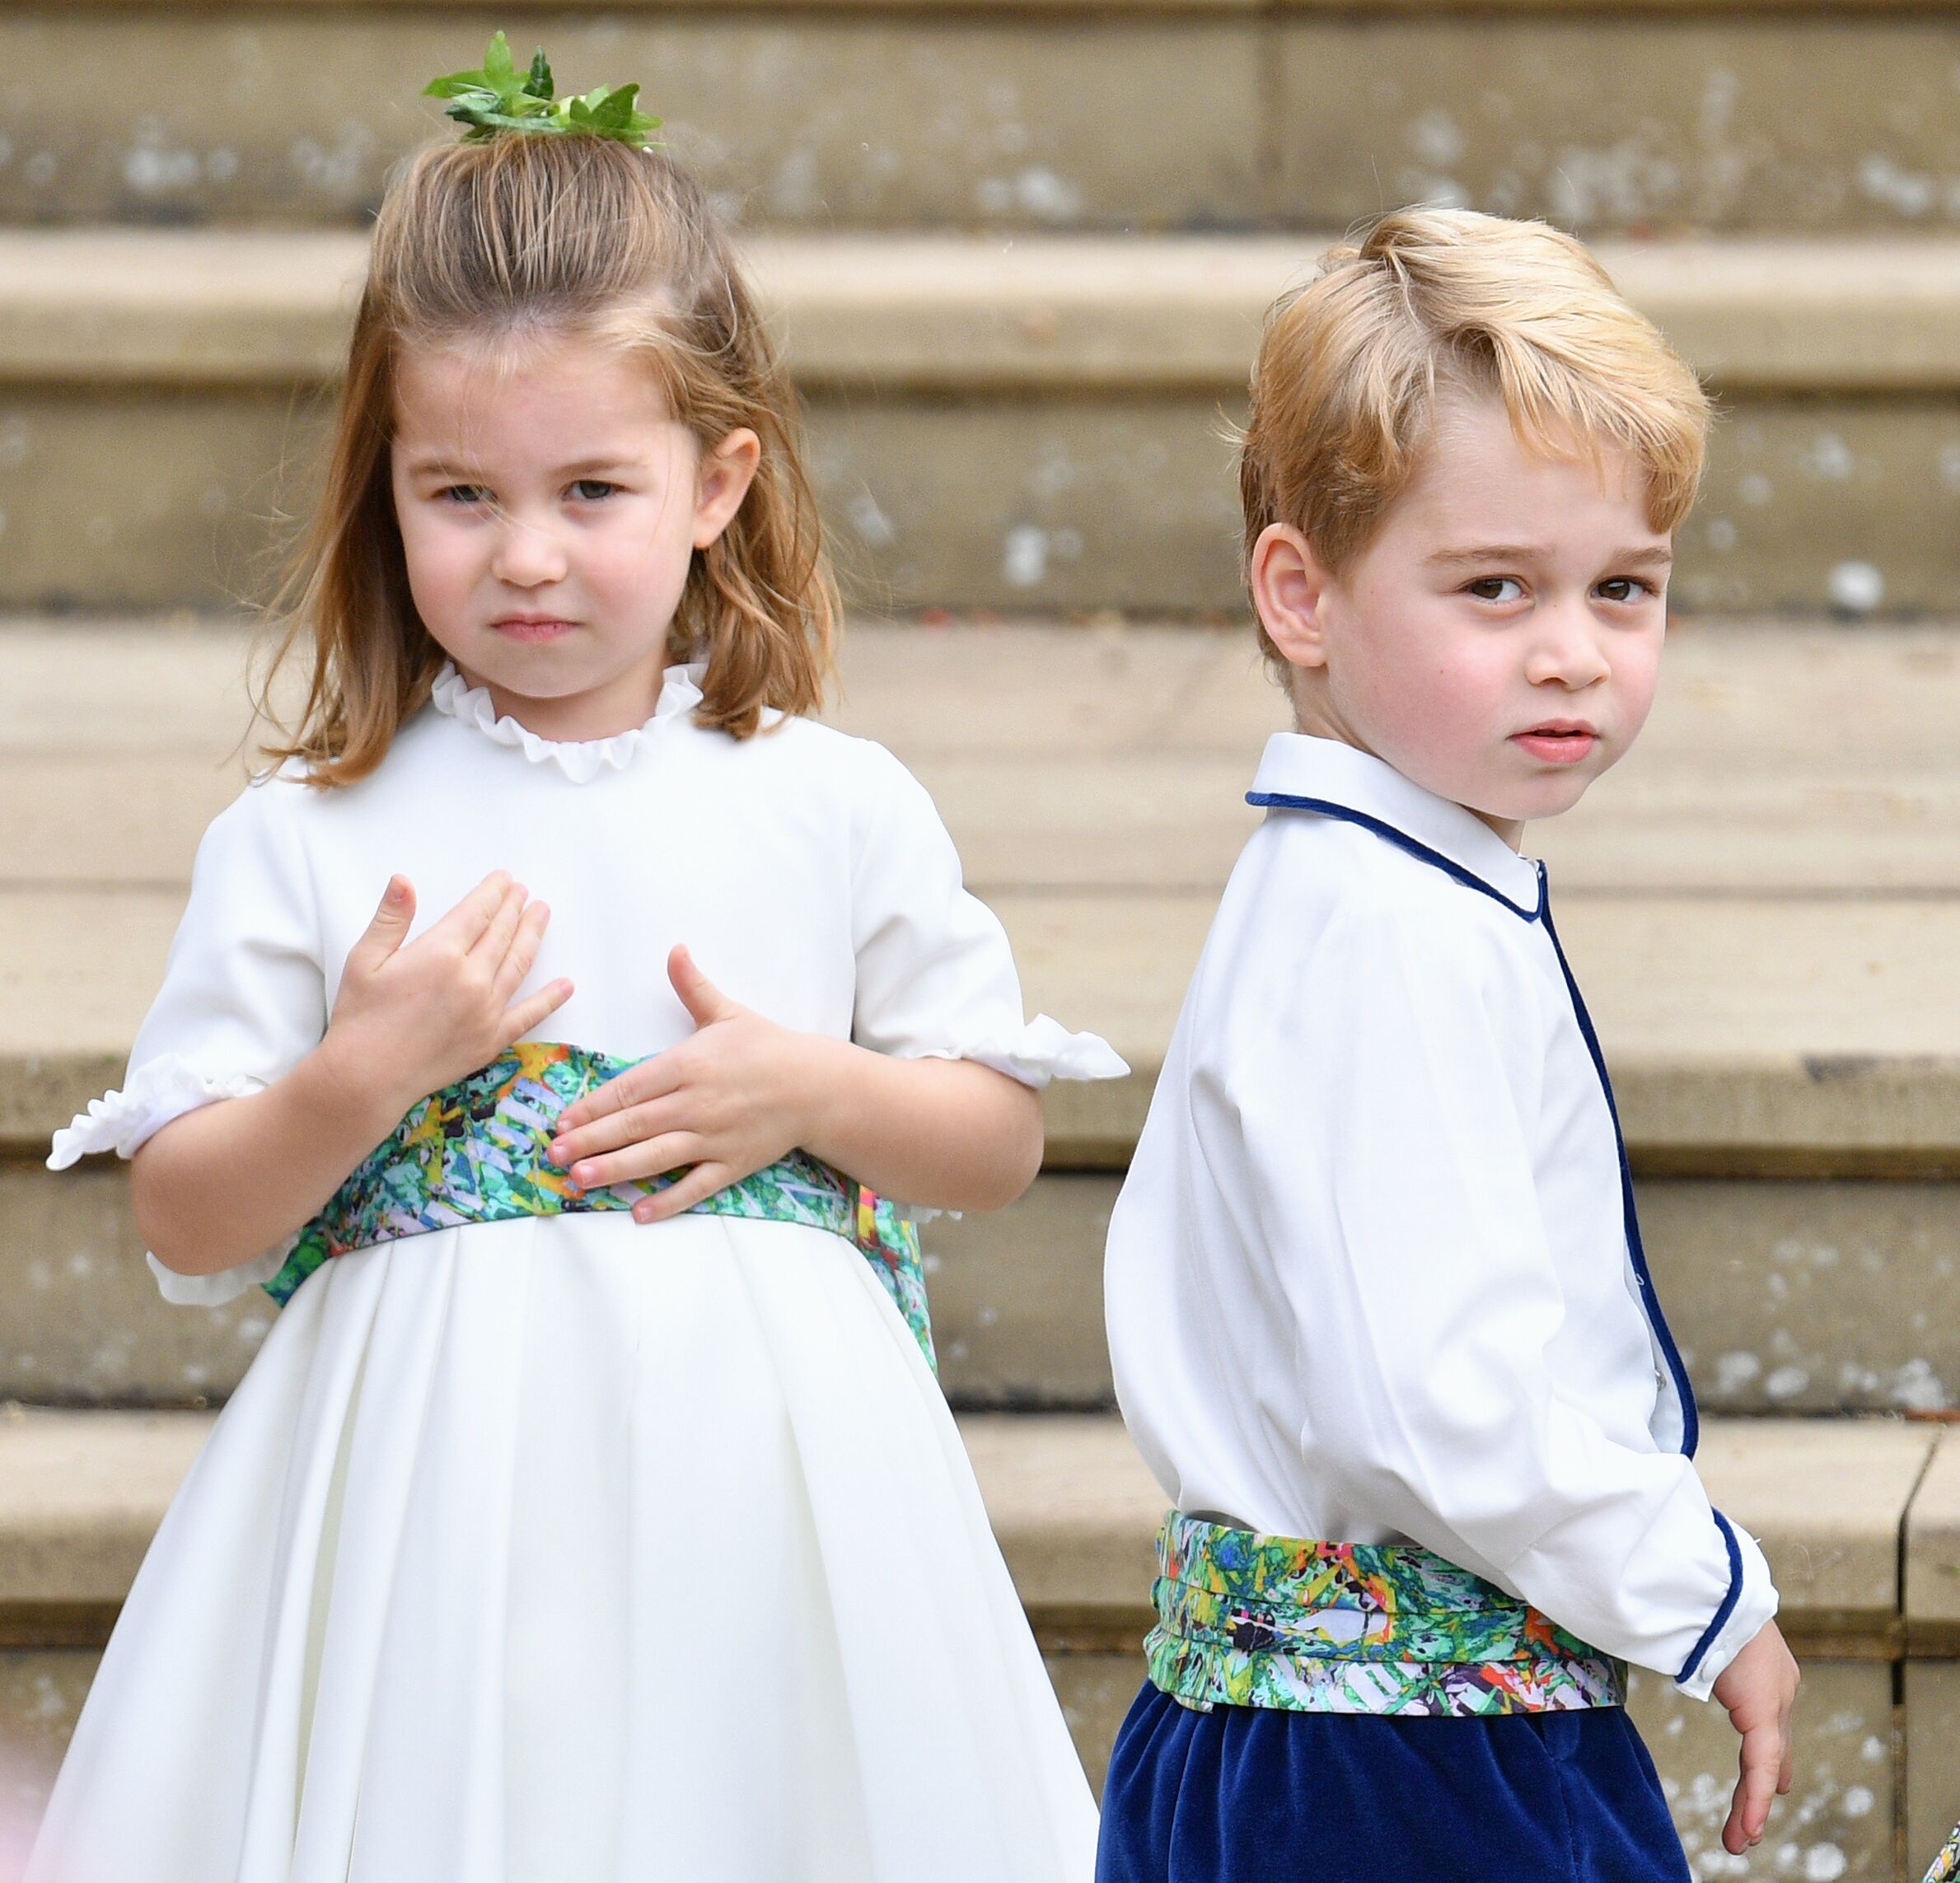 Princess Charlotte of Cambridge and Prince George of Cambridge attend the wedding of Princess Eugenie of York and Jack Brooksbank at St George's Chapel on October 12, 2018 in Windsor, England | Photo: Getty Images